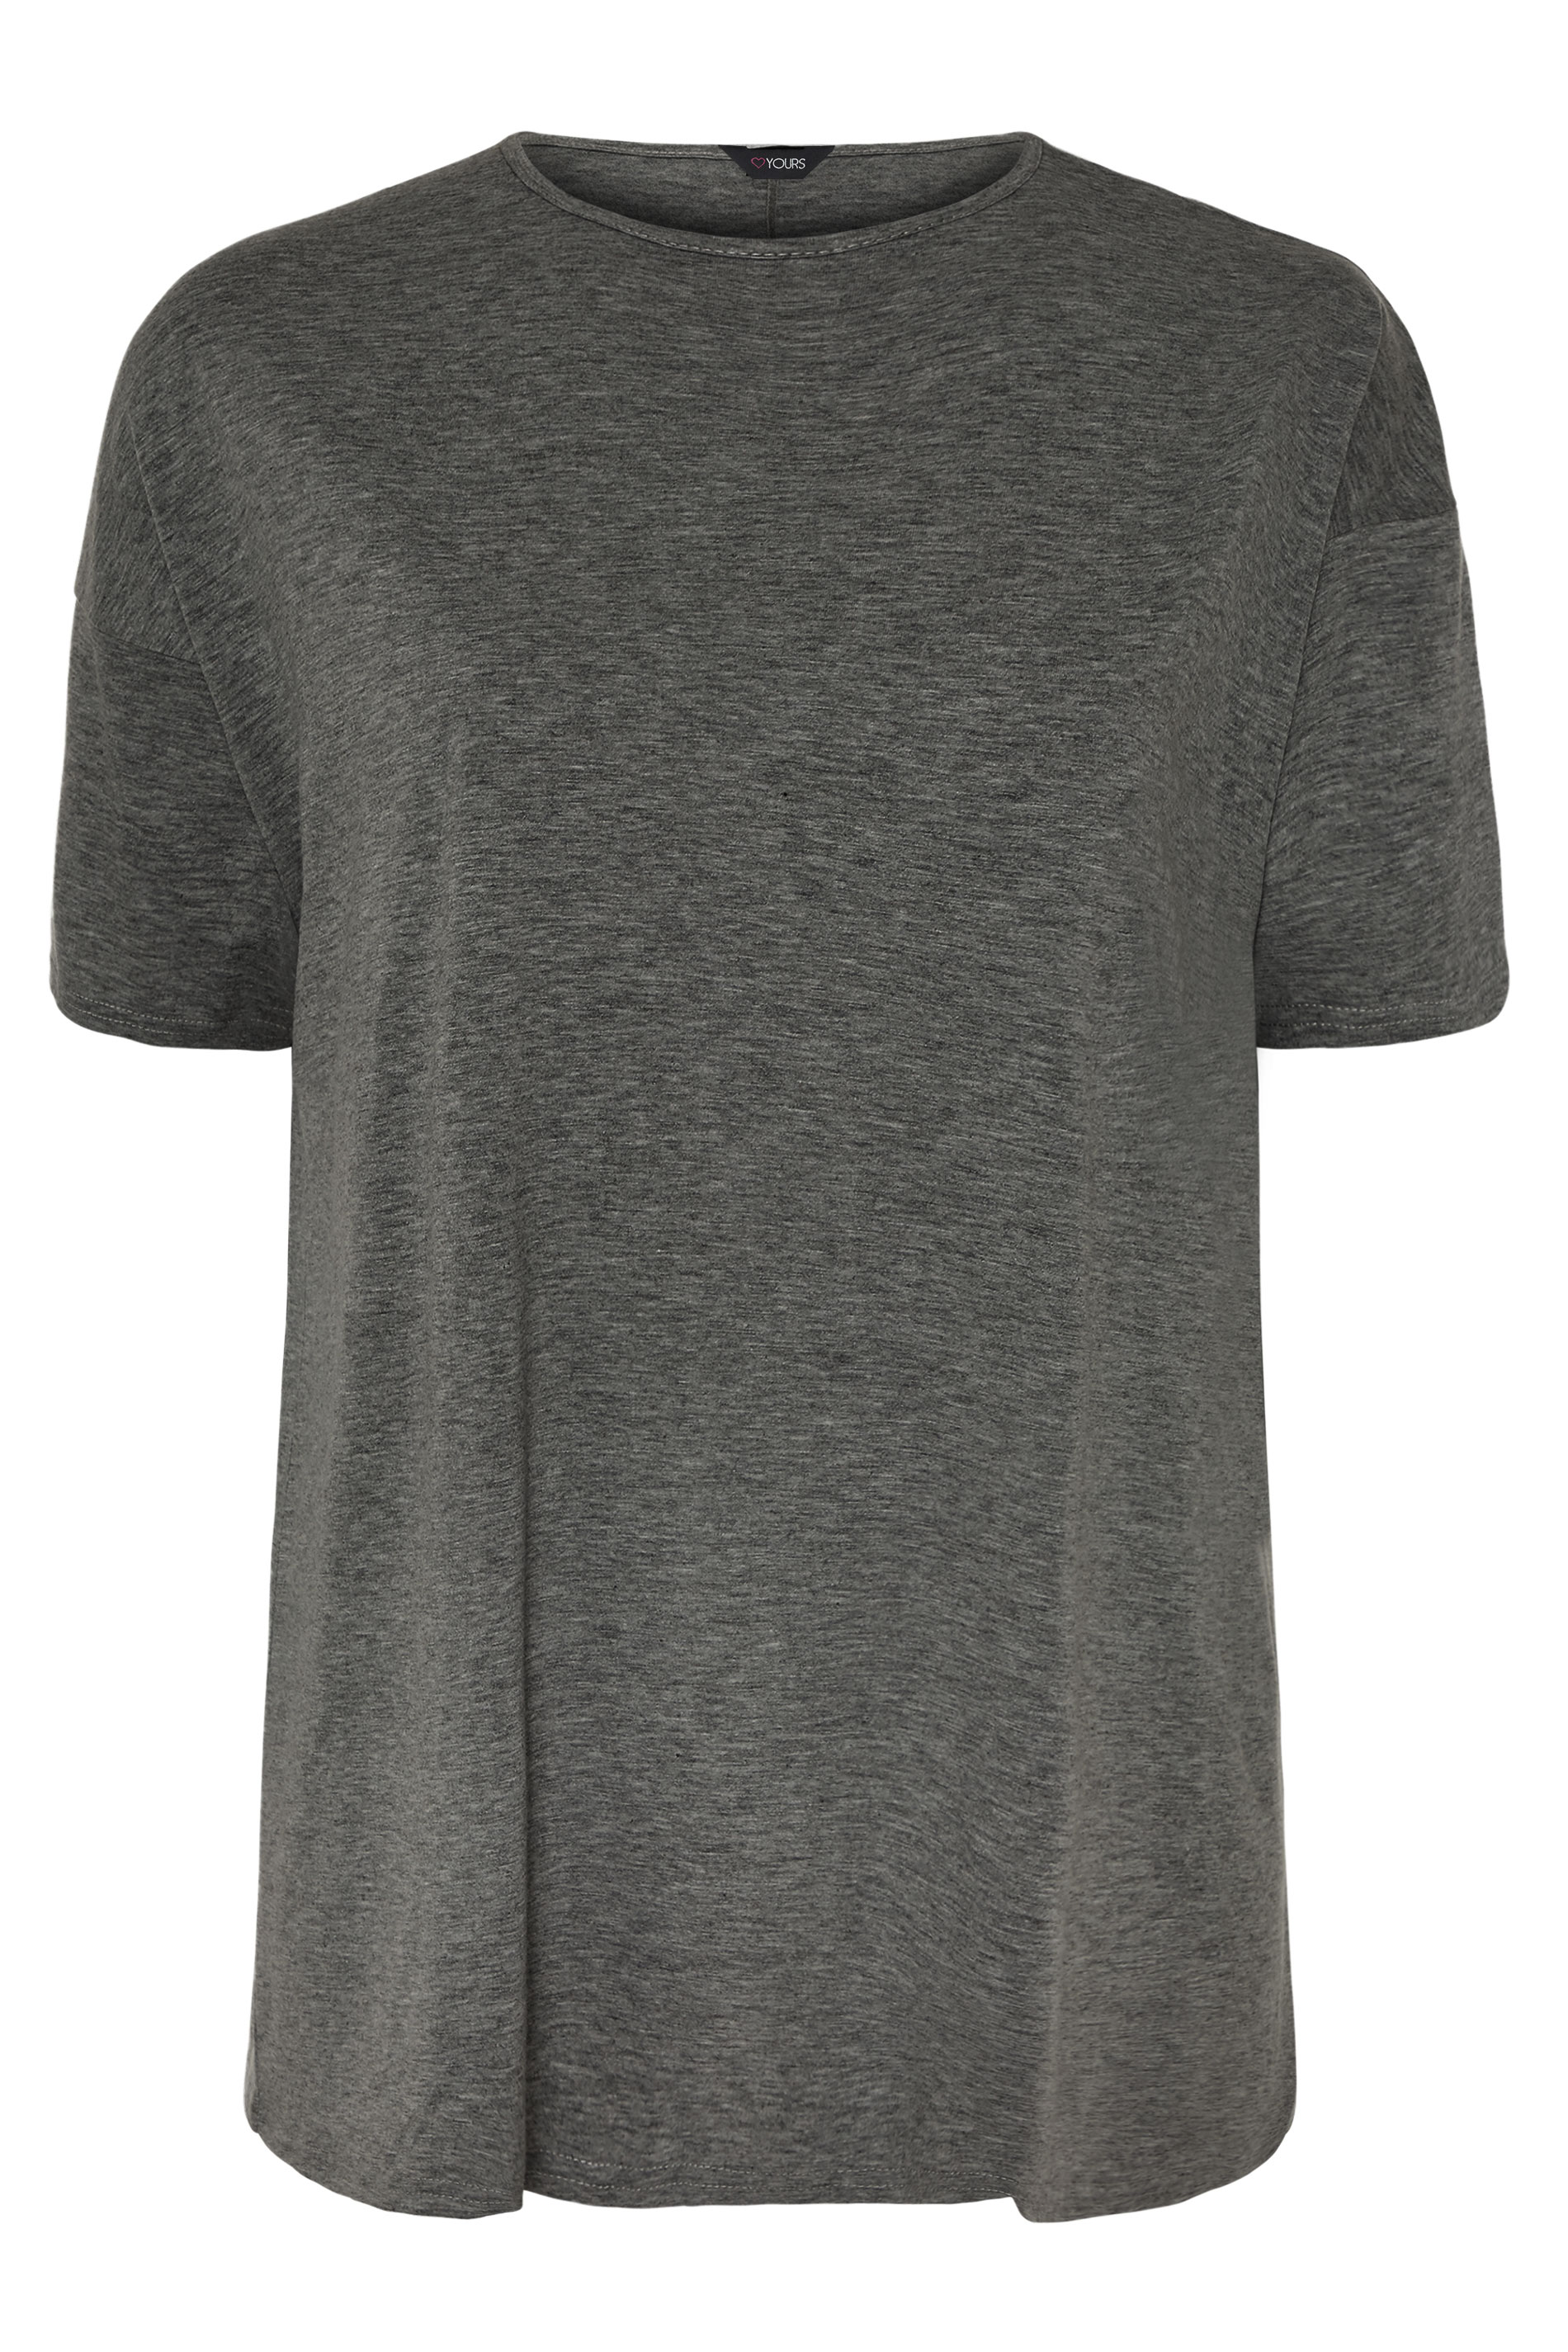 Charcoal Grey Jersey Oversized T-Shirt | Yours Clothing